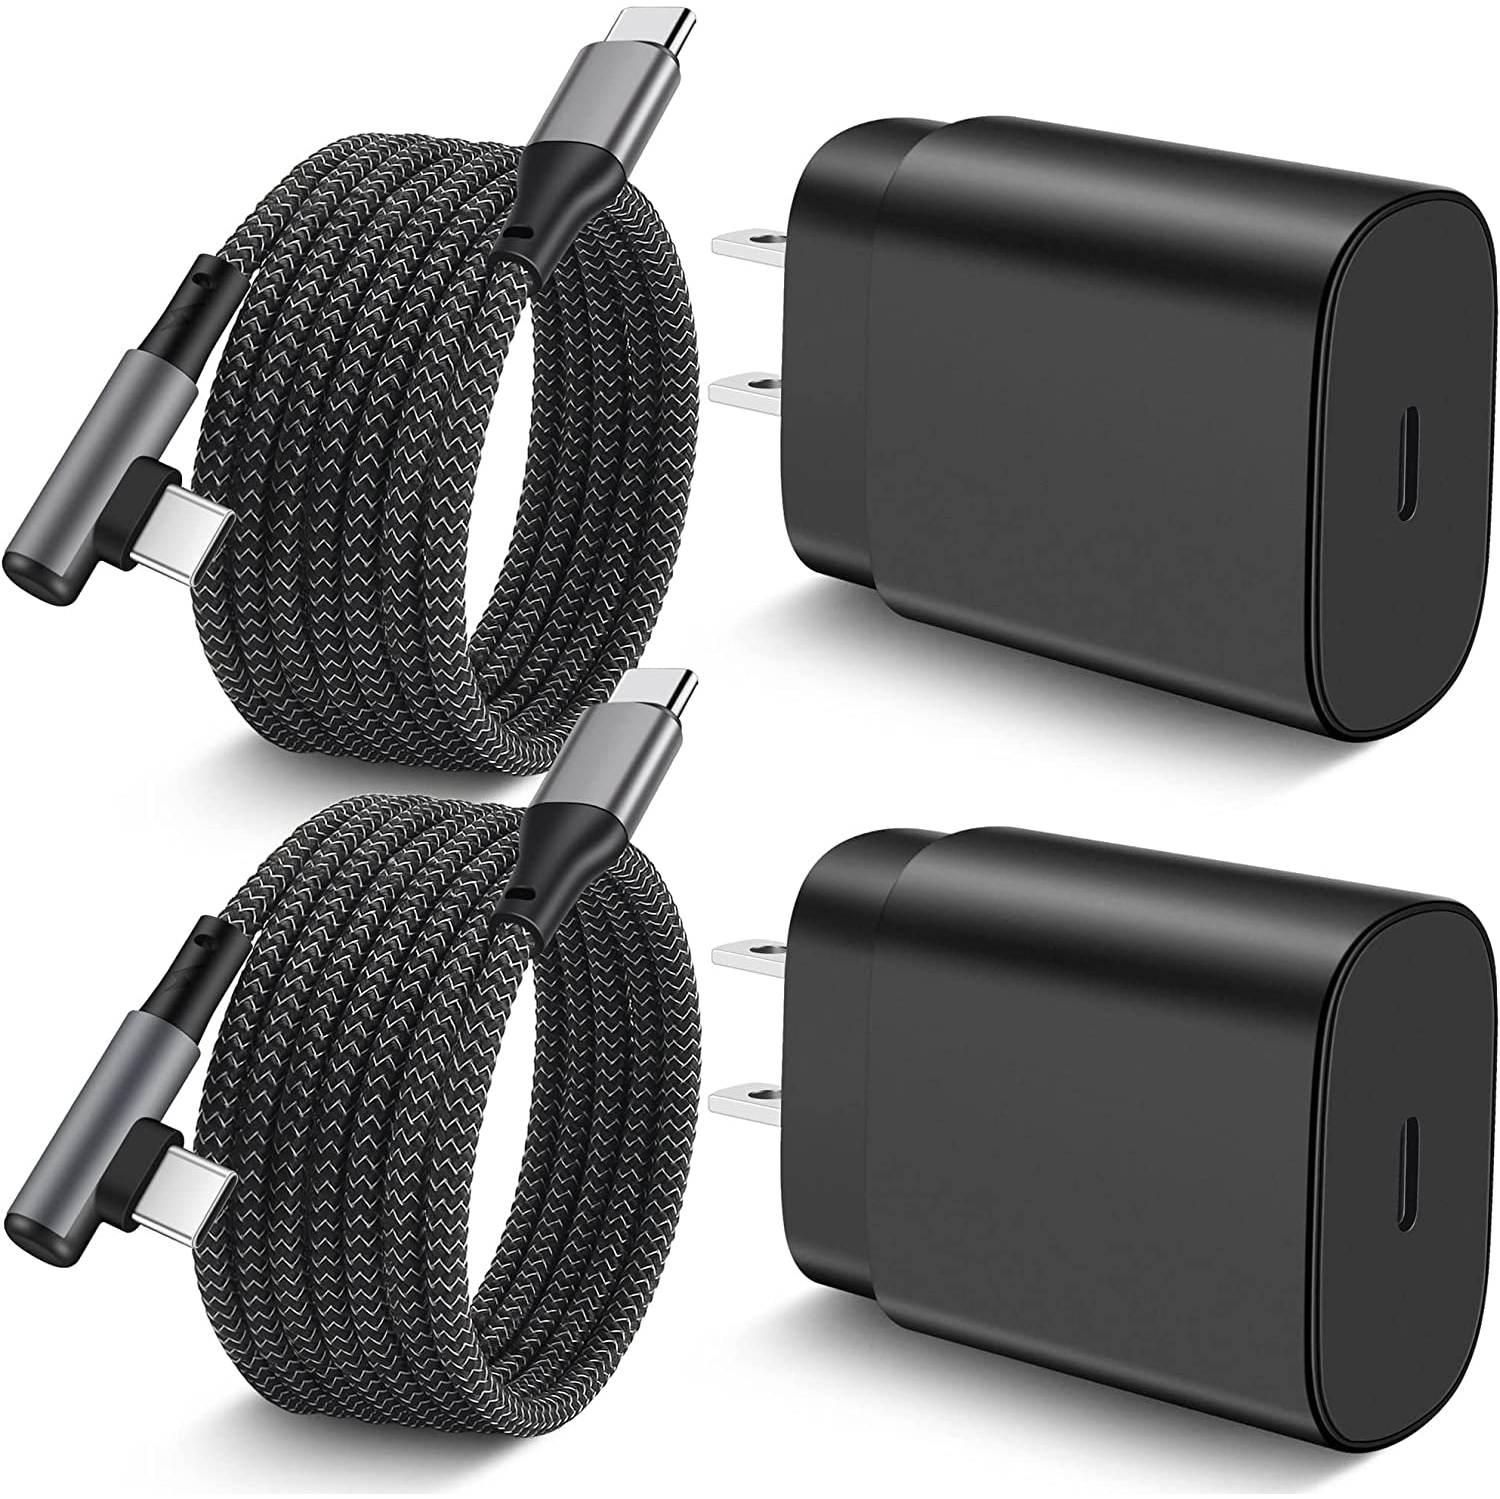 2-Pack Super Fast Charger for Samsung Galaxy S23/S23 Ultra/S23+/S22/S22 Ultra/S21/S21 Ultra/S20/Note 20/Z Fold 4/3